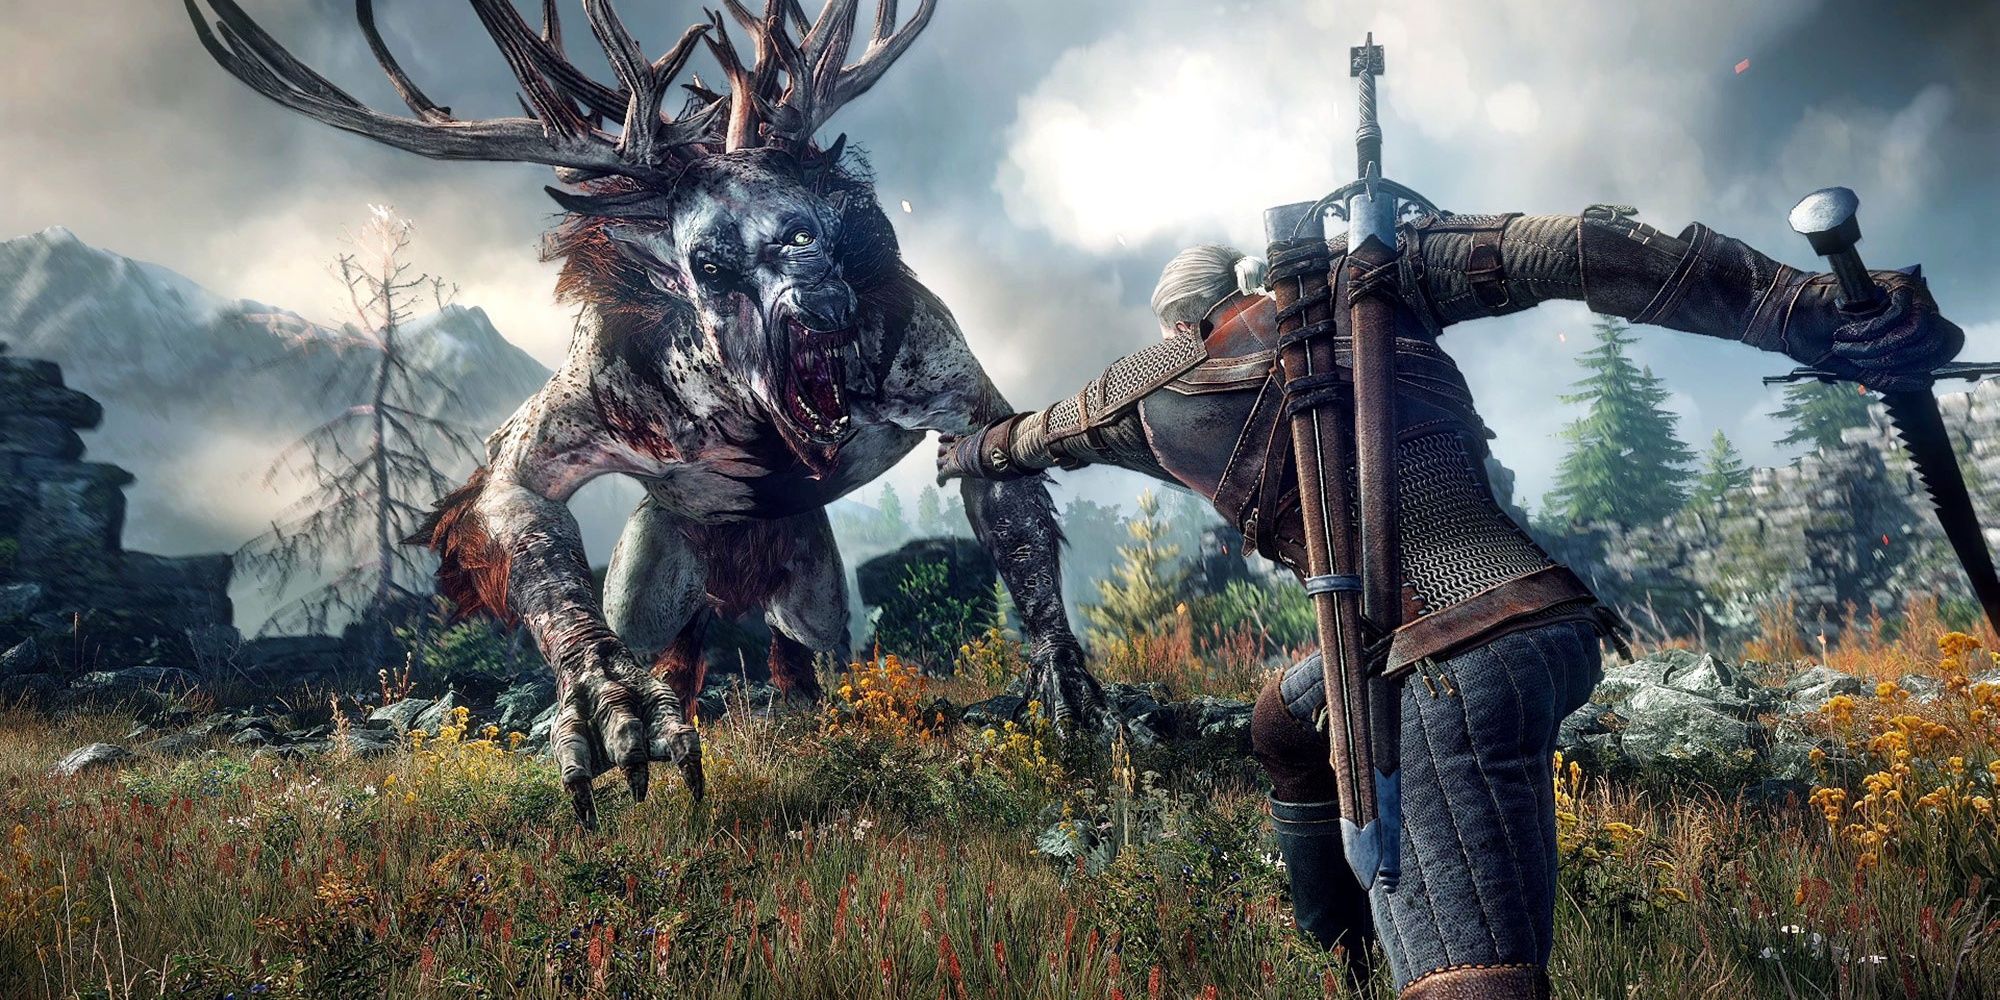 Geralt fighting a fiend monster with a sword in The Witcher 3: Wild Hunt.